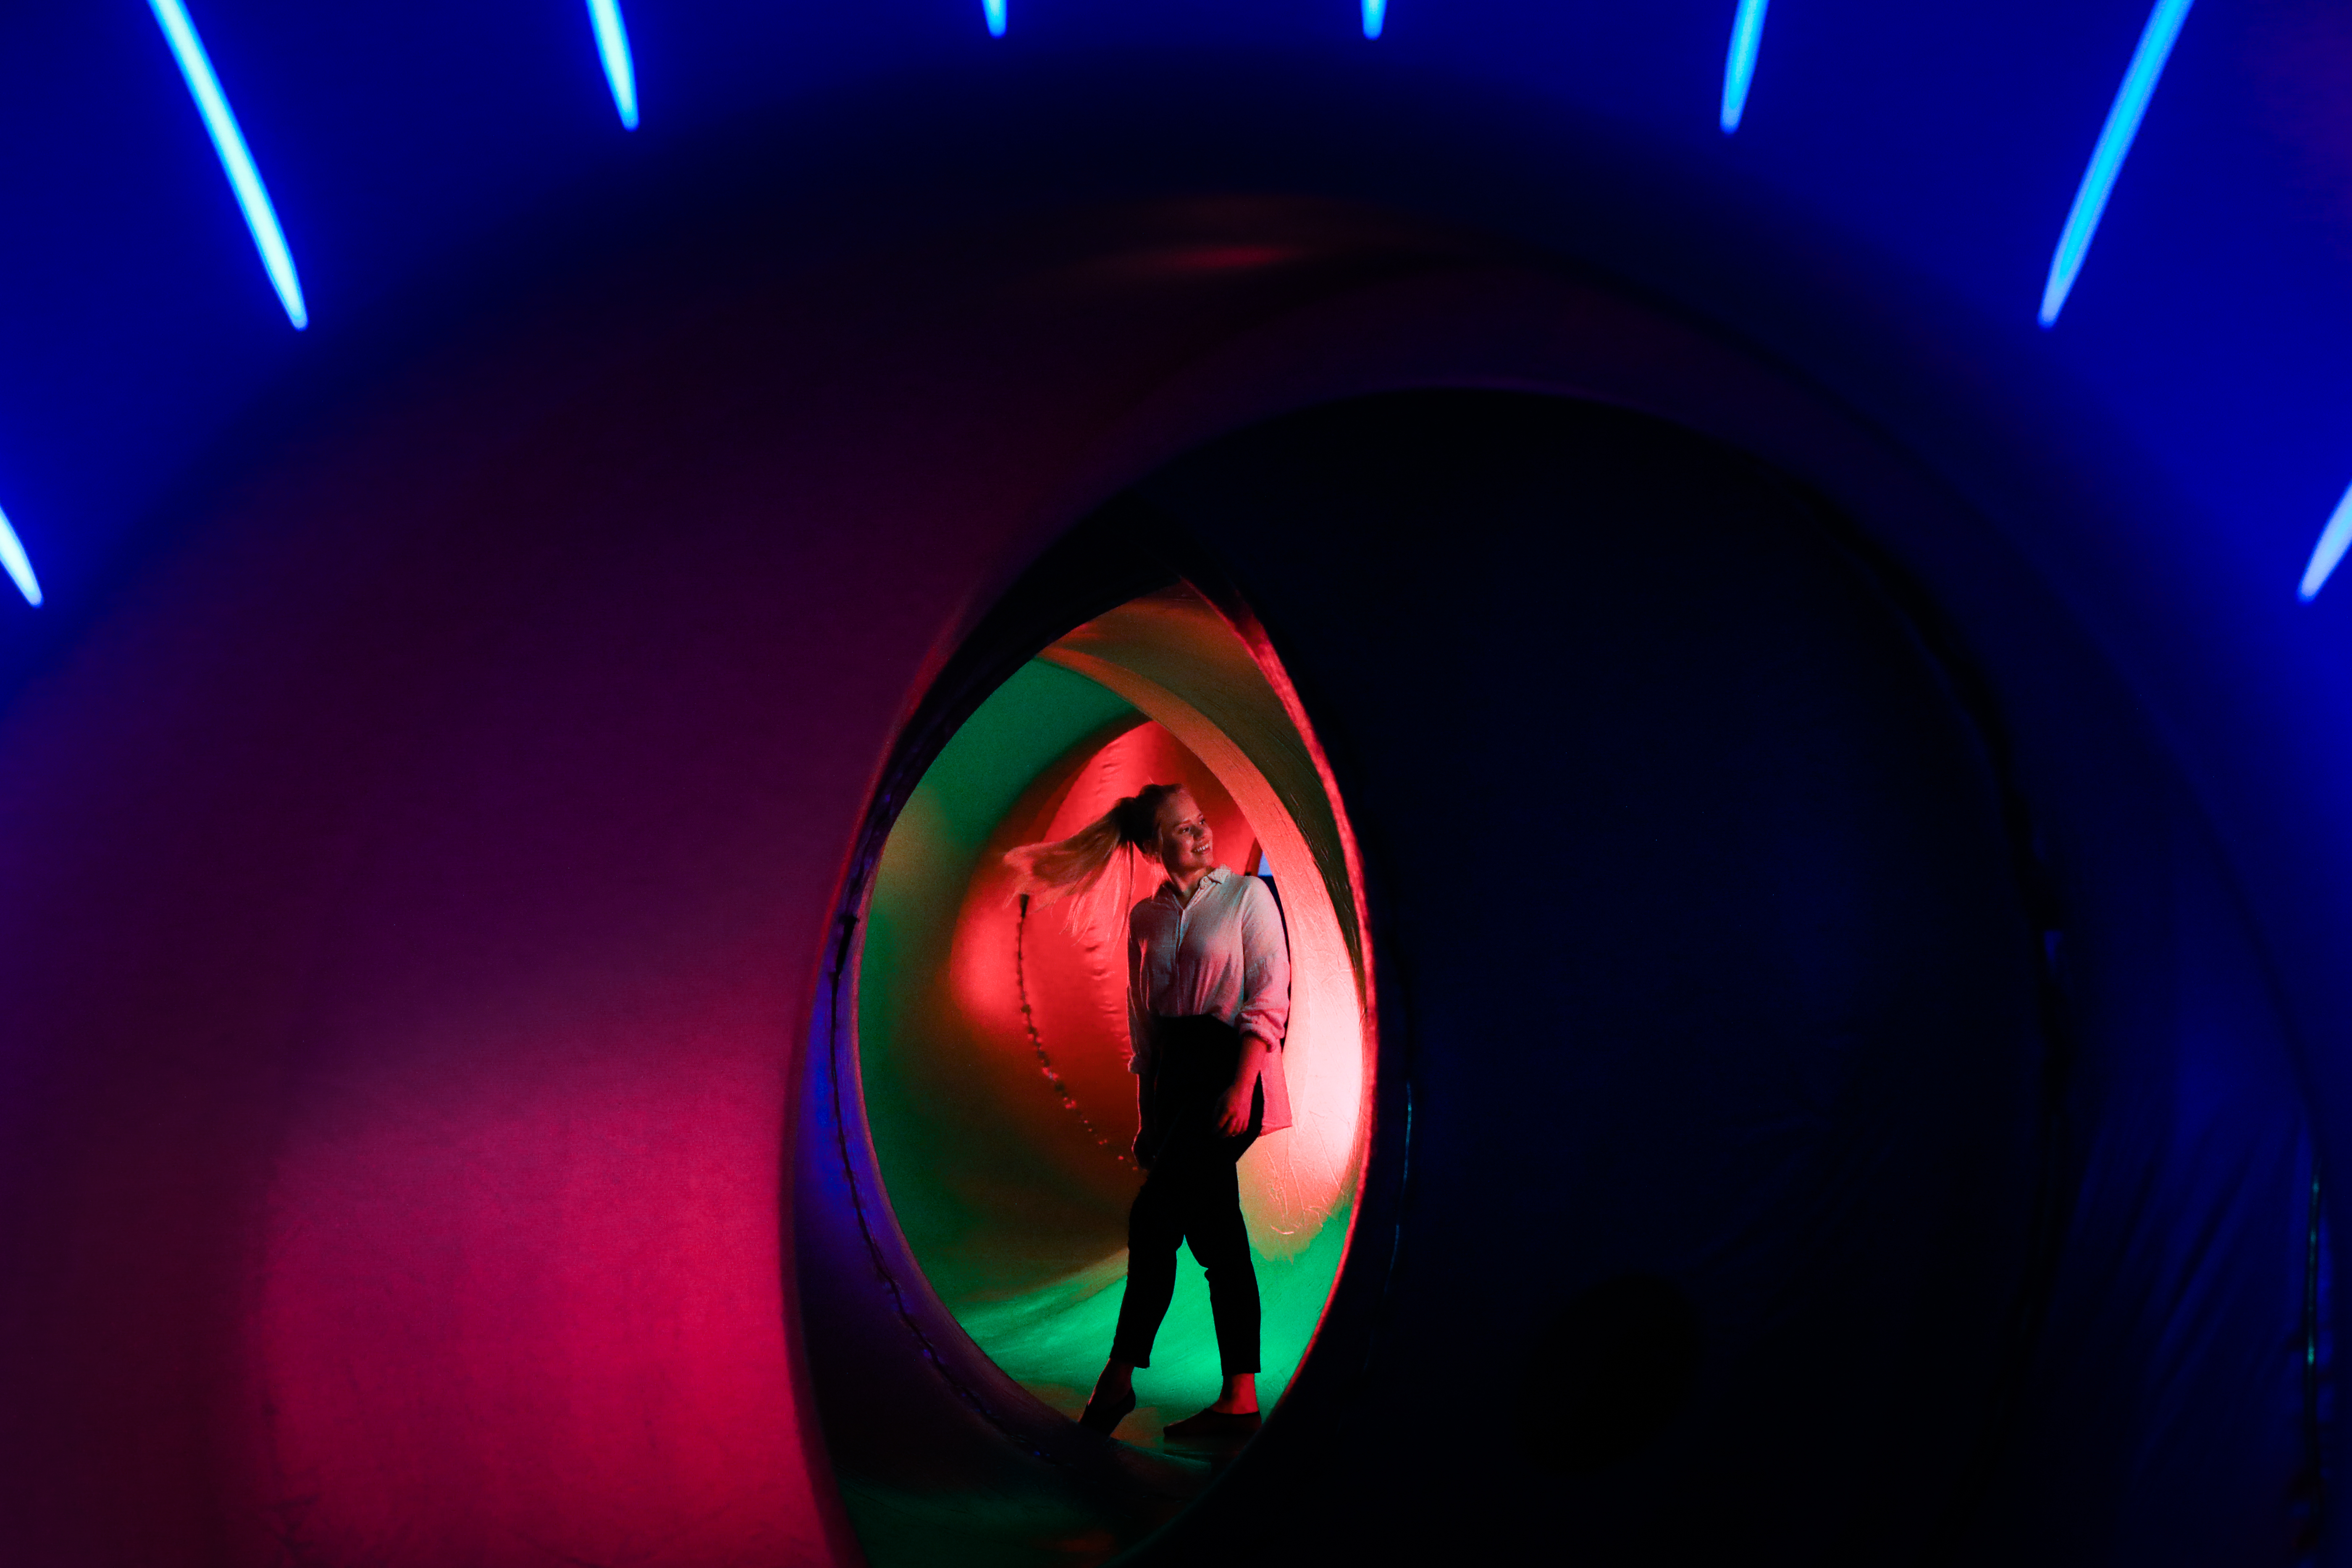 People wander through the domes of the luminarium.